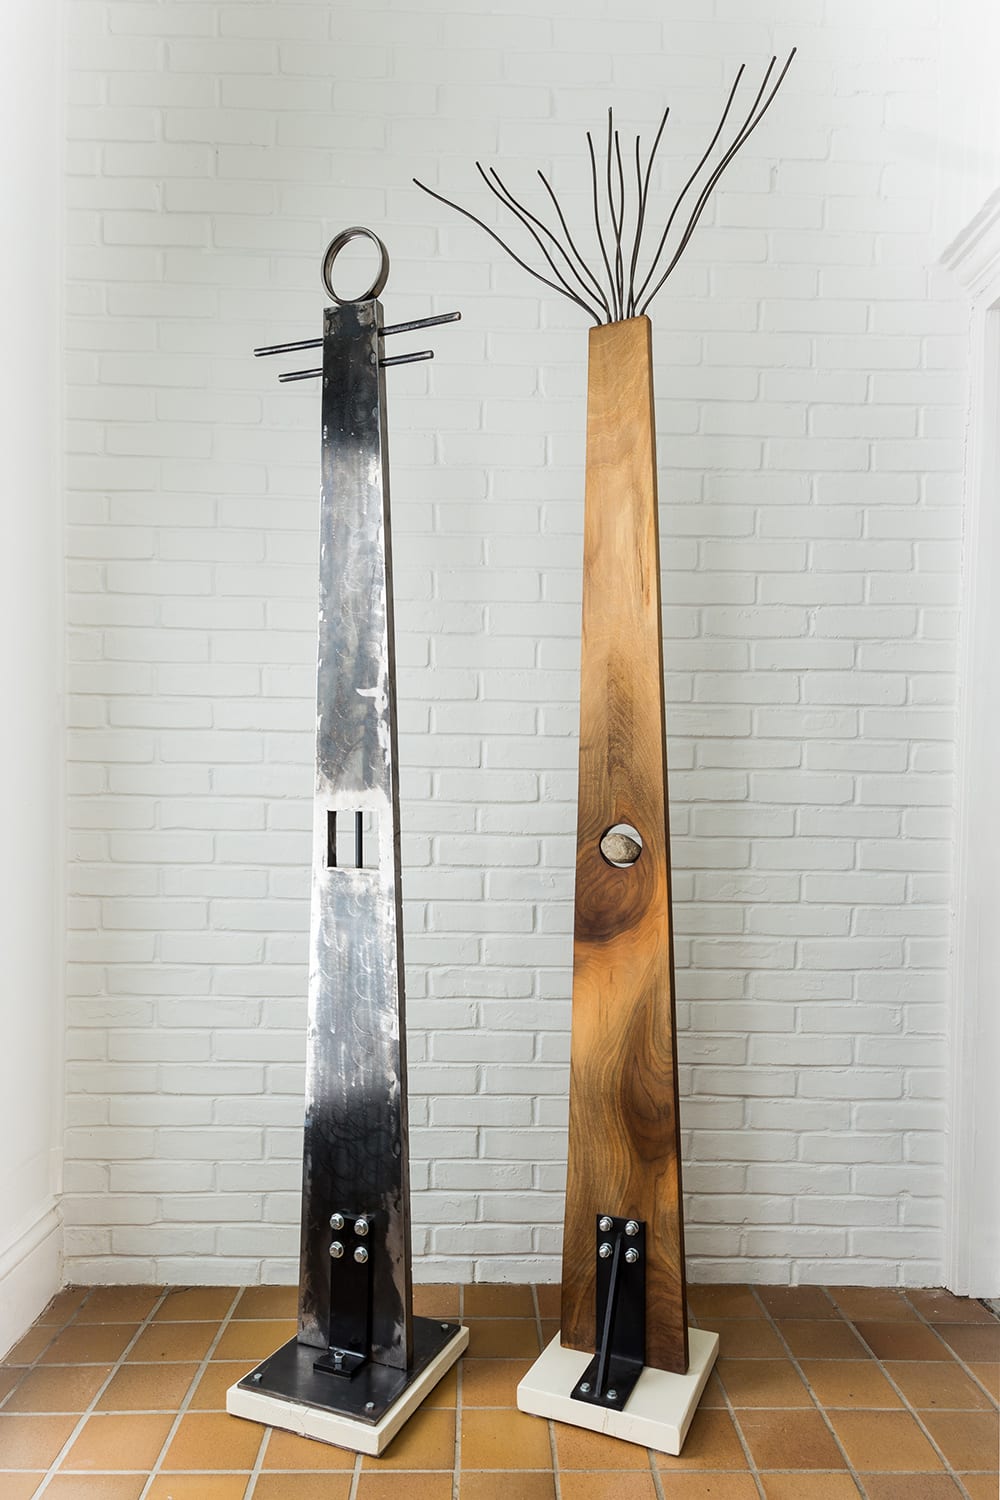 Mike Wilkins, Sculpture and furniture created from scrap steel and reclaimed wood